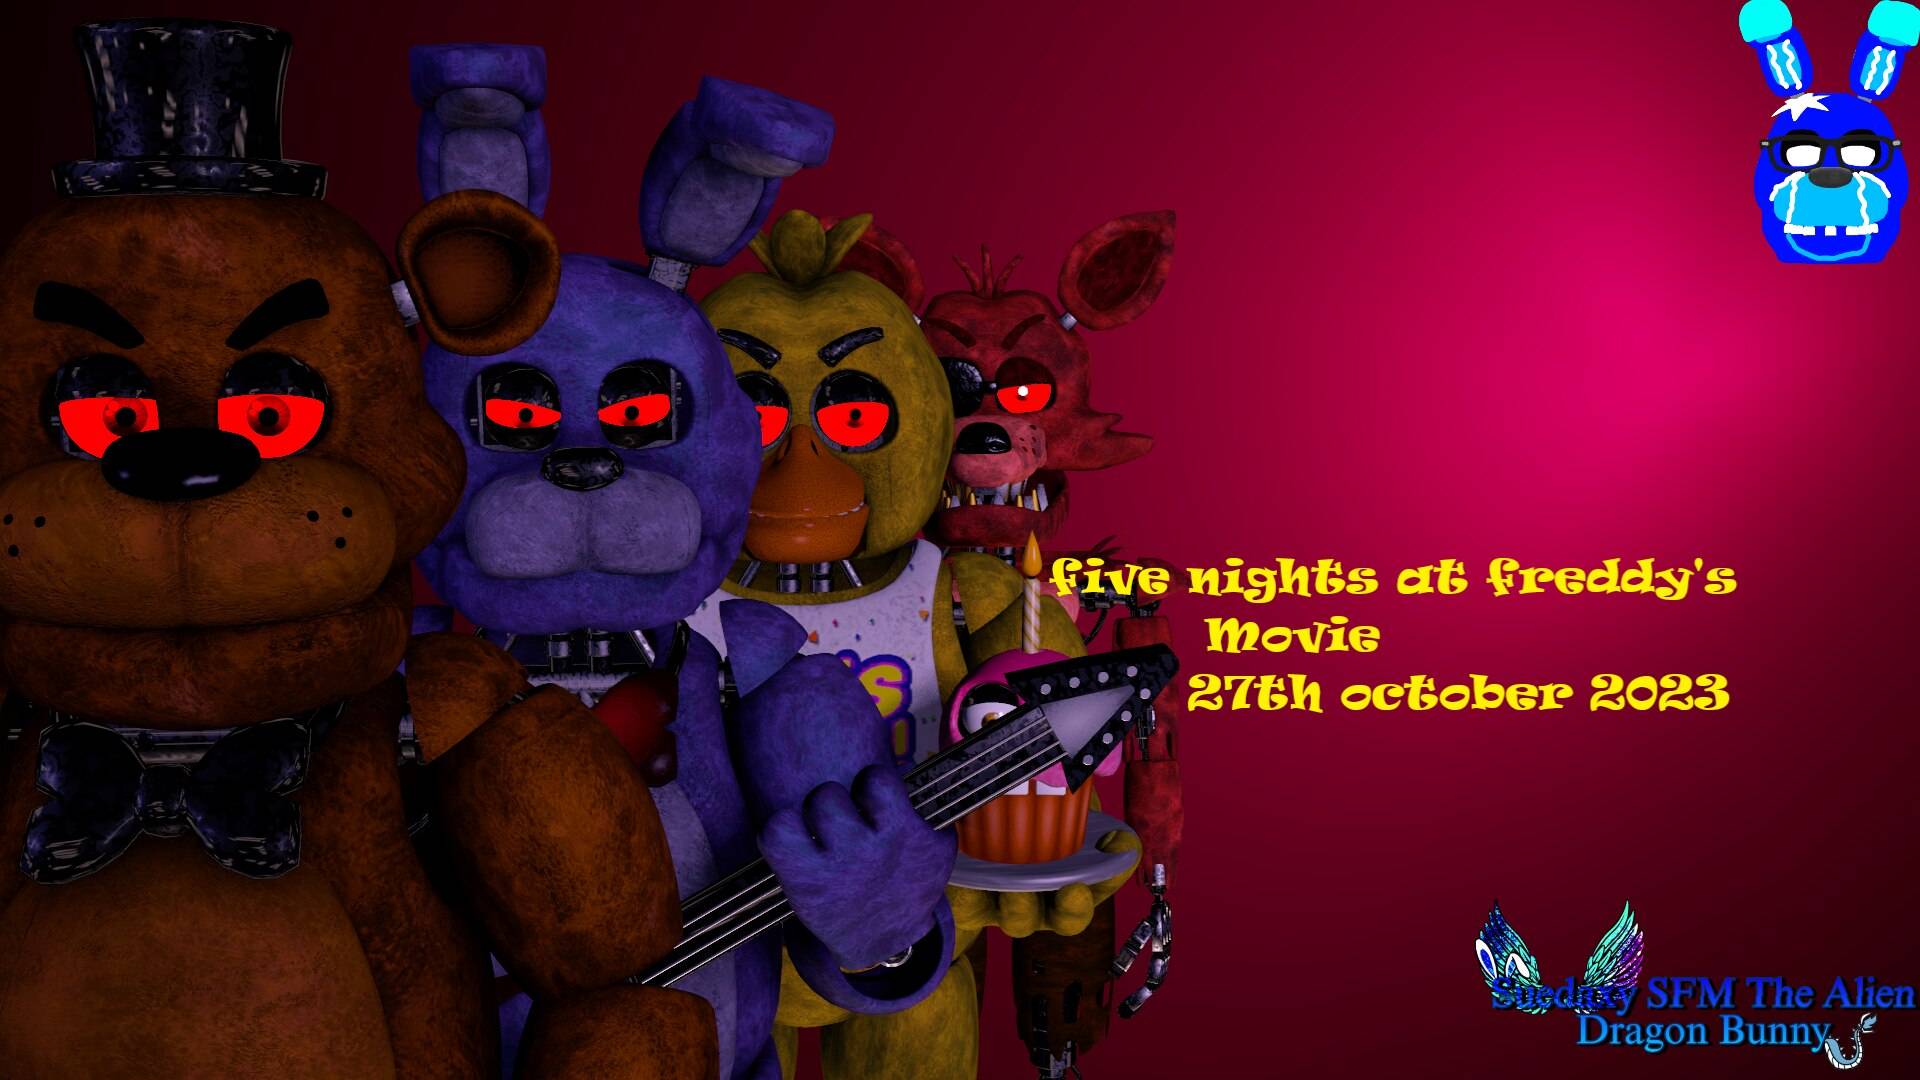 BIGGEST opening for a video game movie! #fnafmovie #fnaf #fnafmovieupd